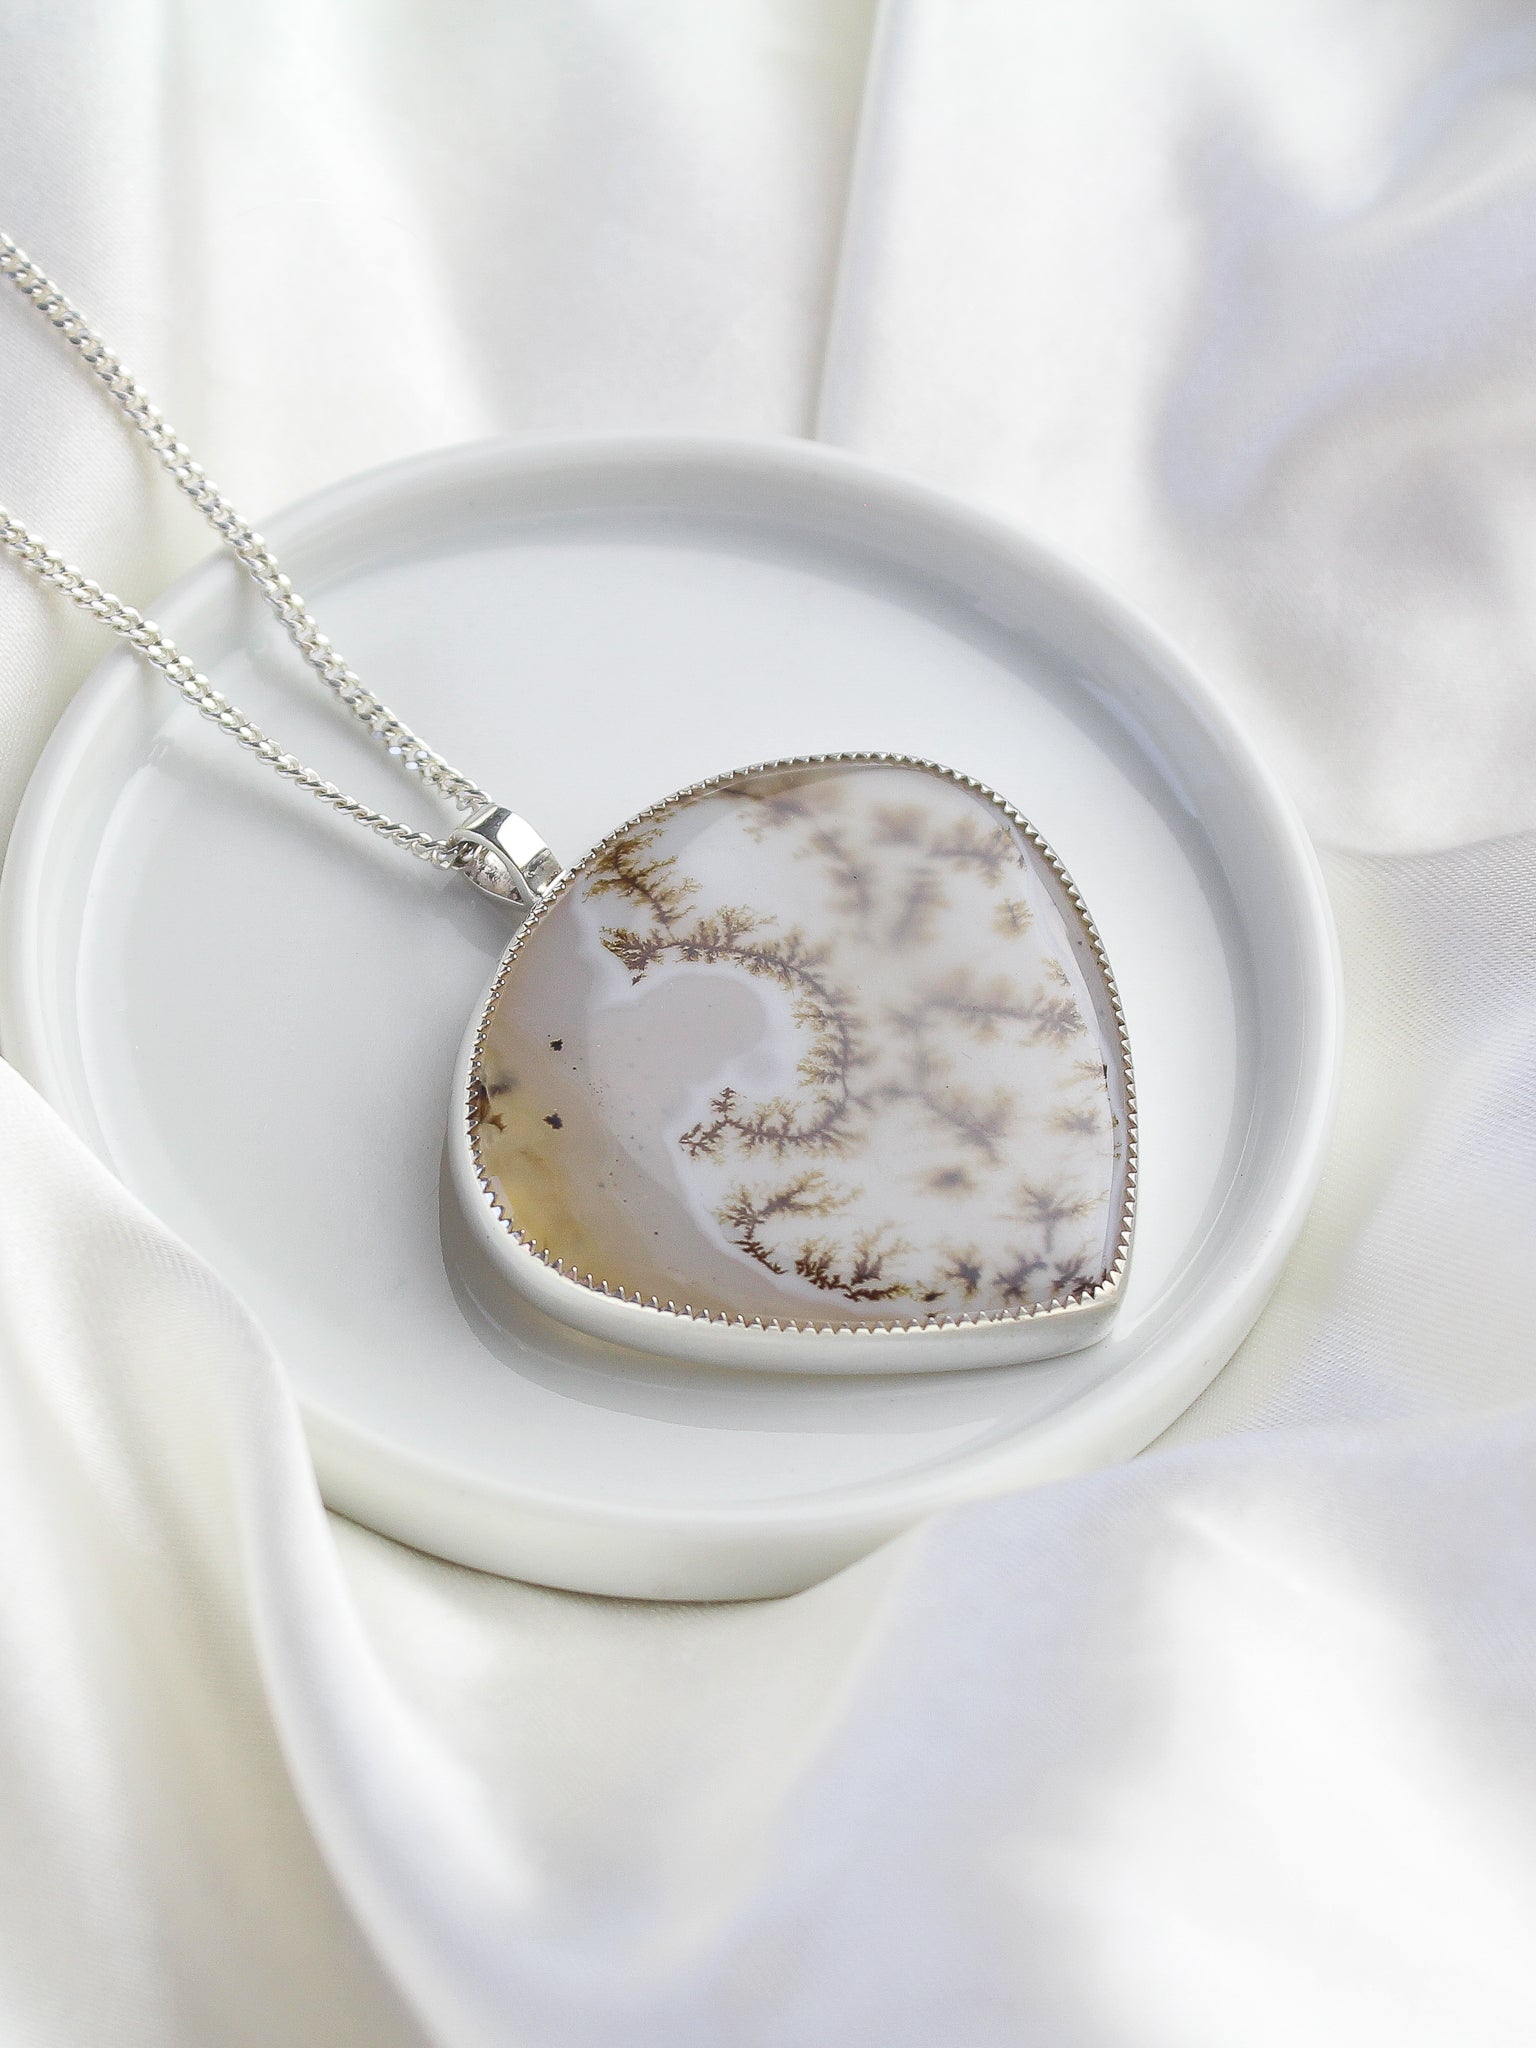 scenic dendritic agate 925 sterling silver pendant necklace handmade jewelry